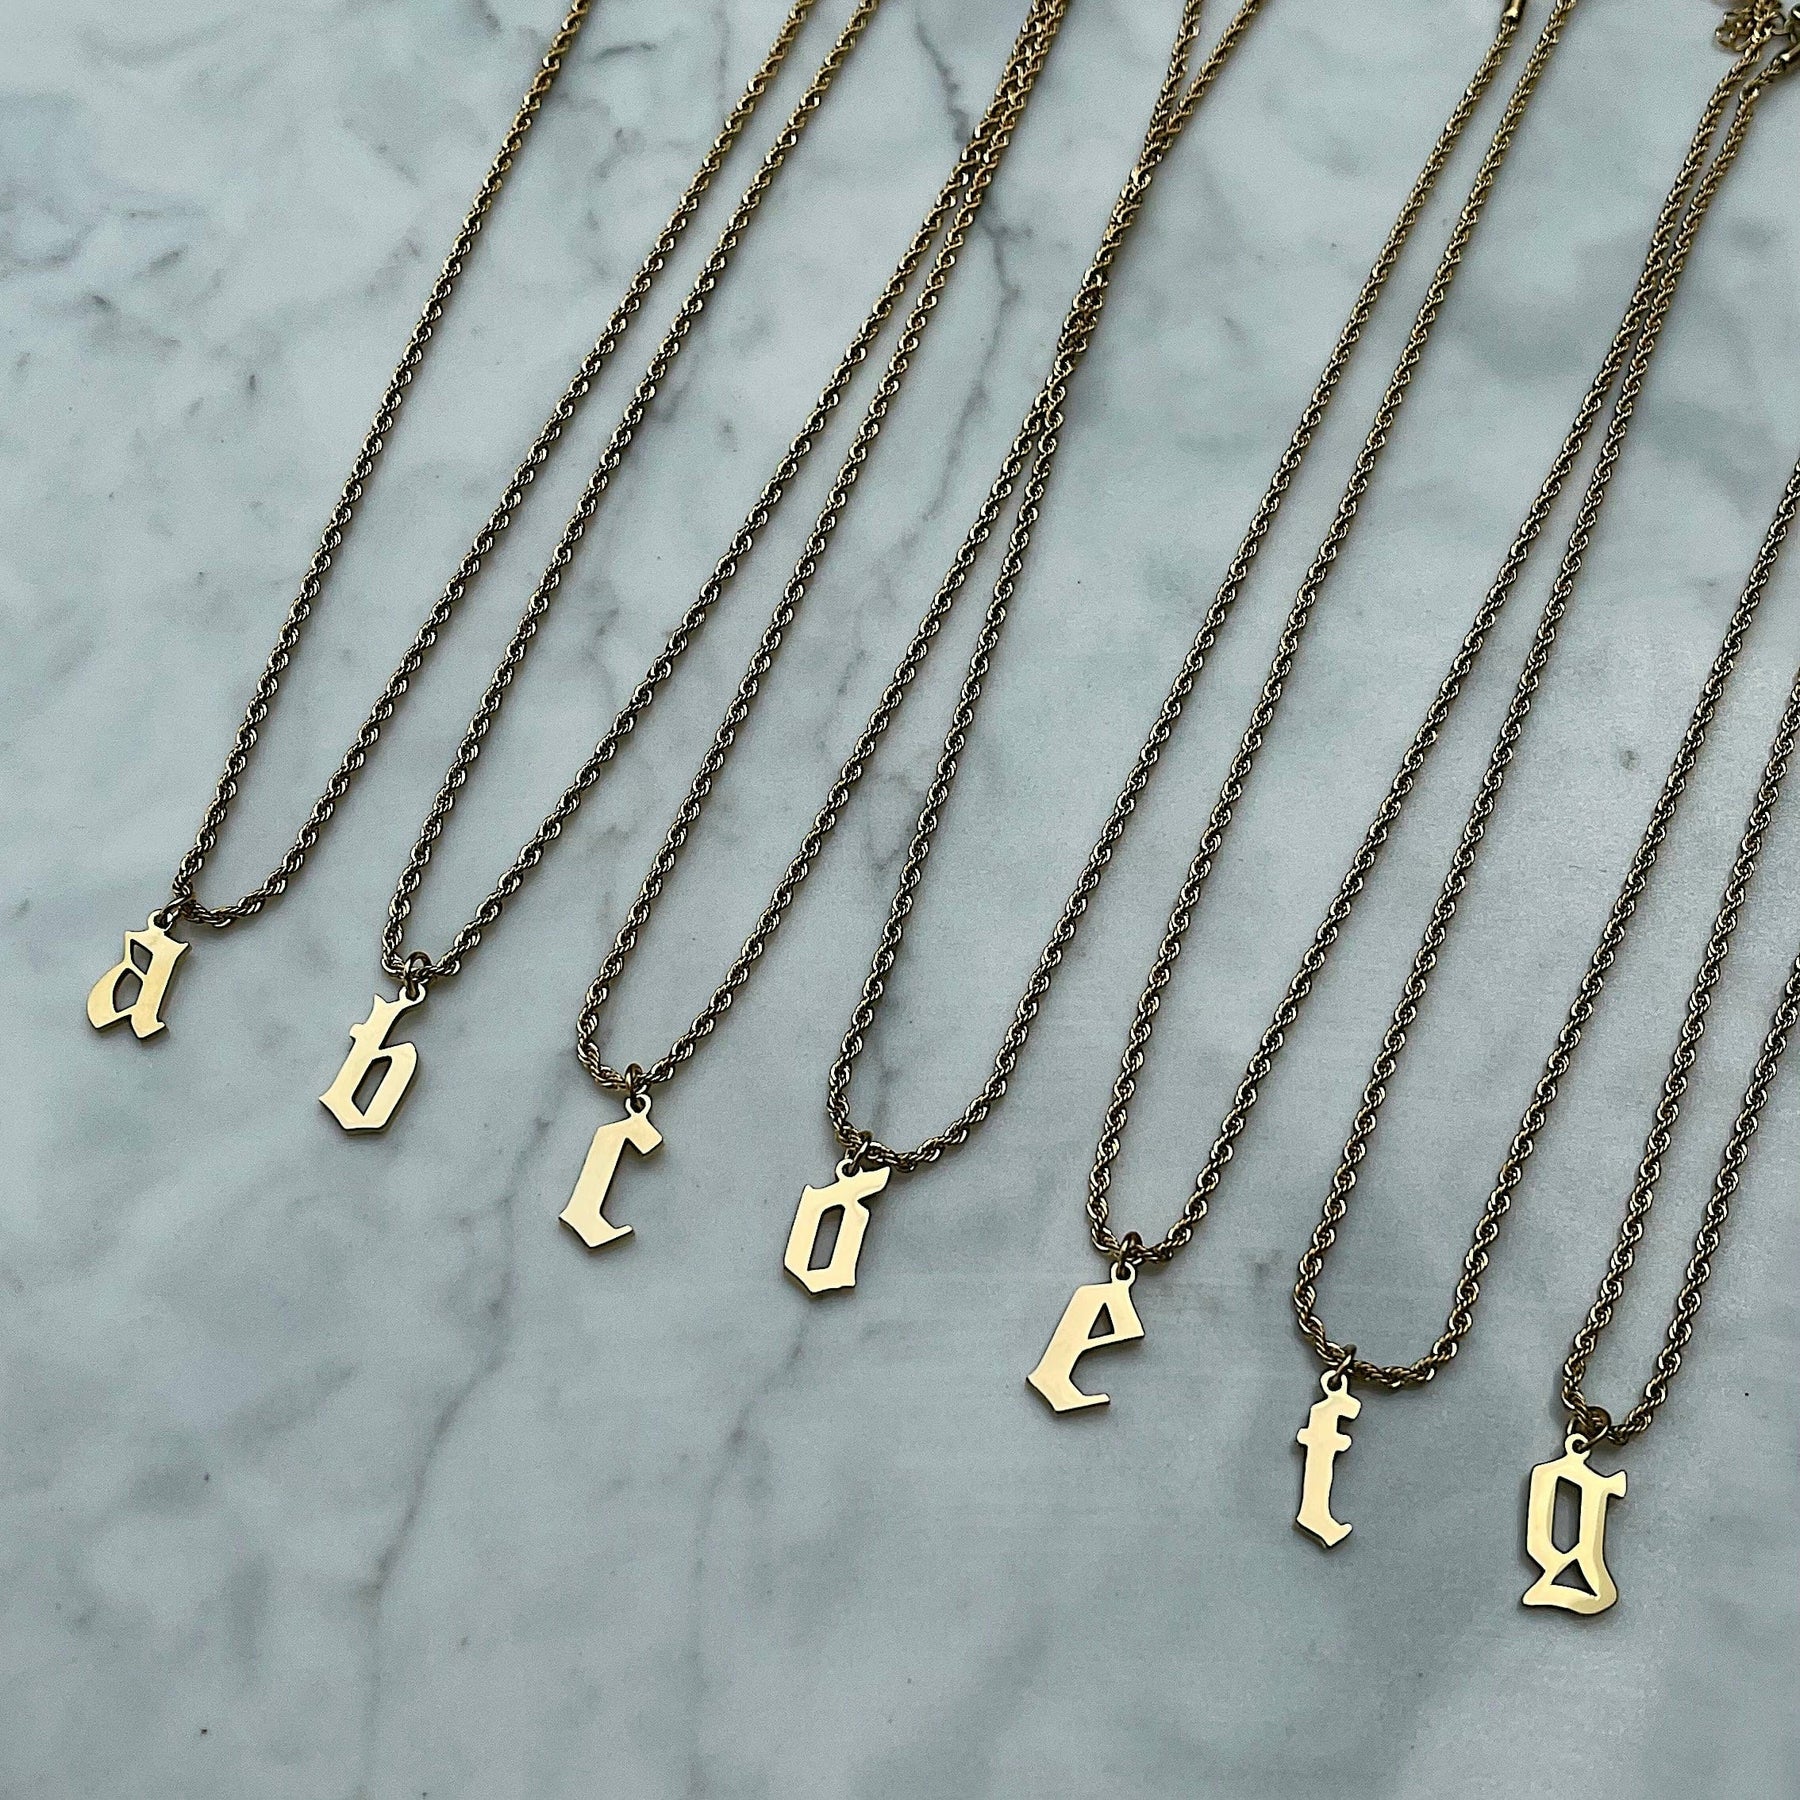 BohoMoon Stainless Steel Marella Lowercase Initial Necklace